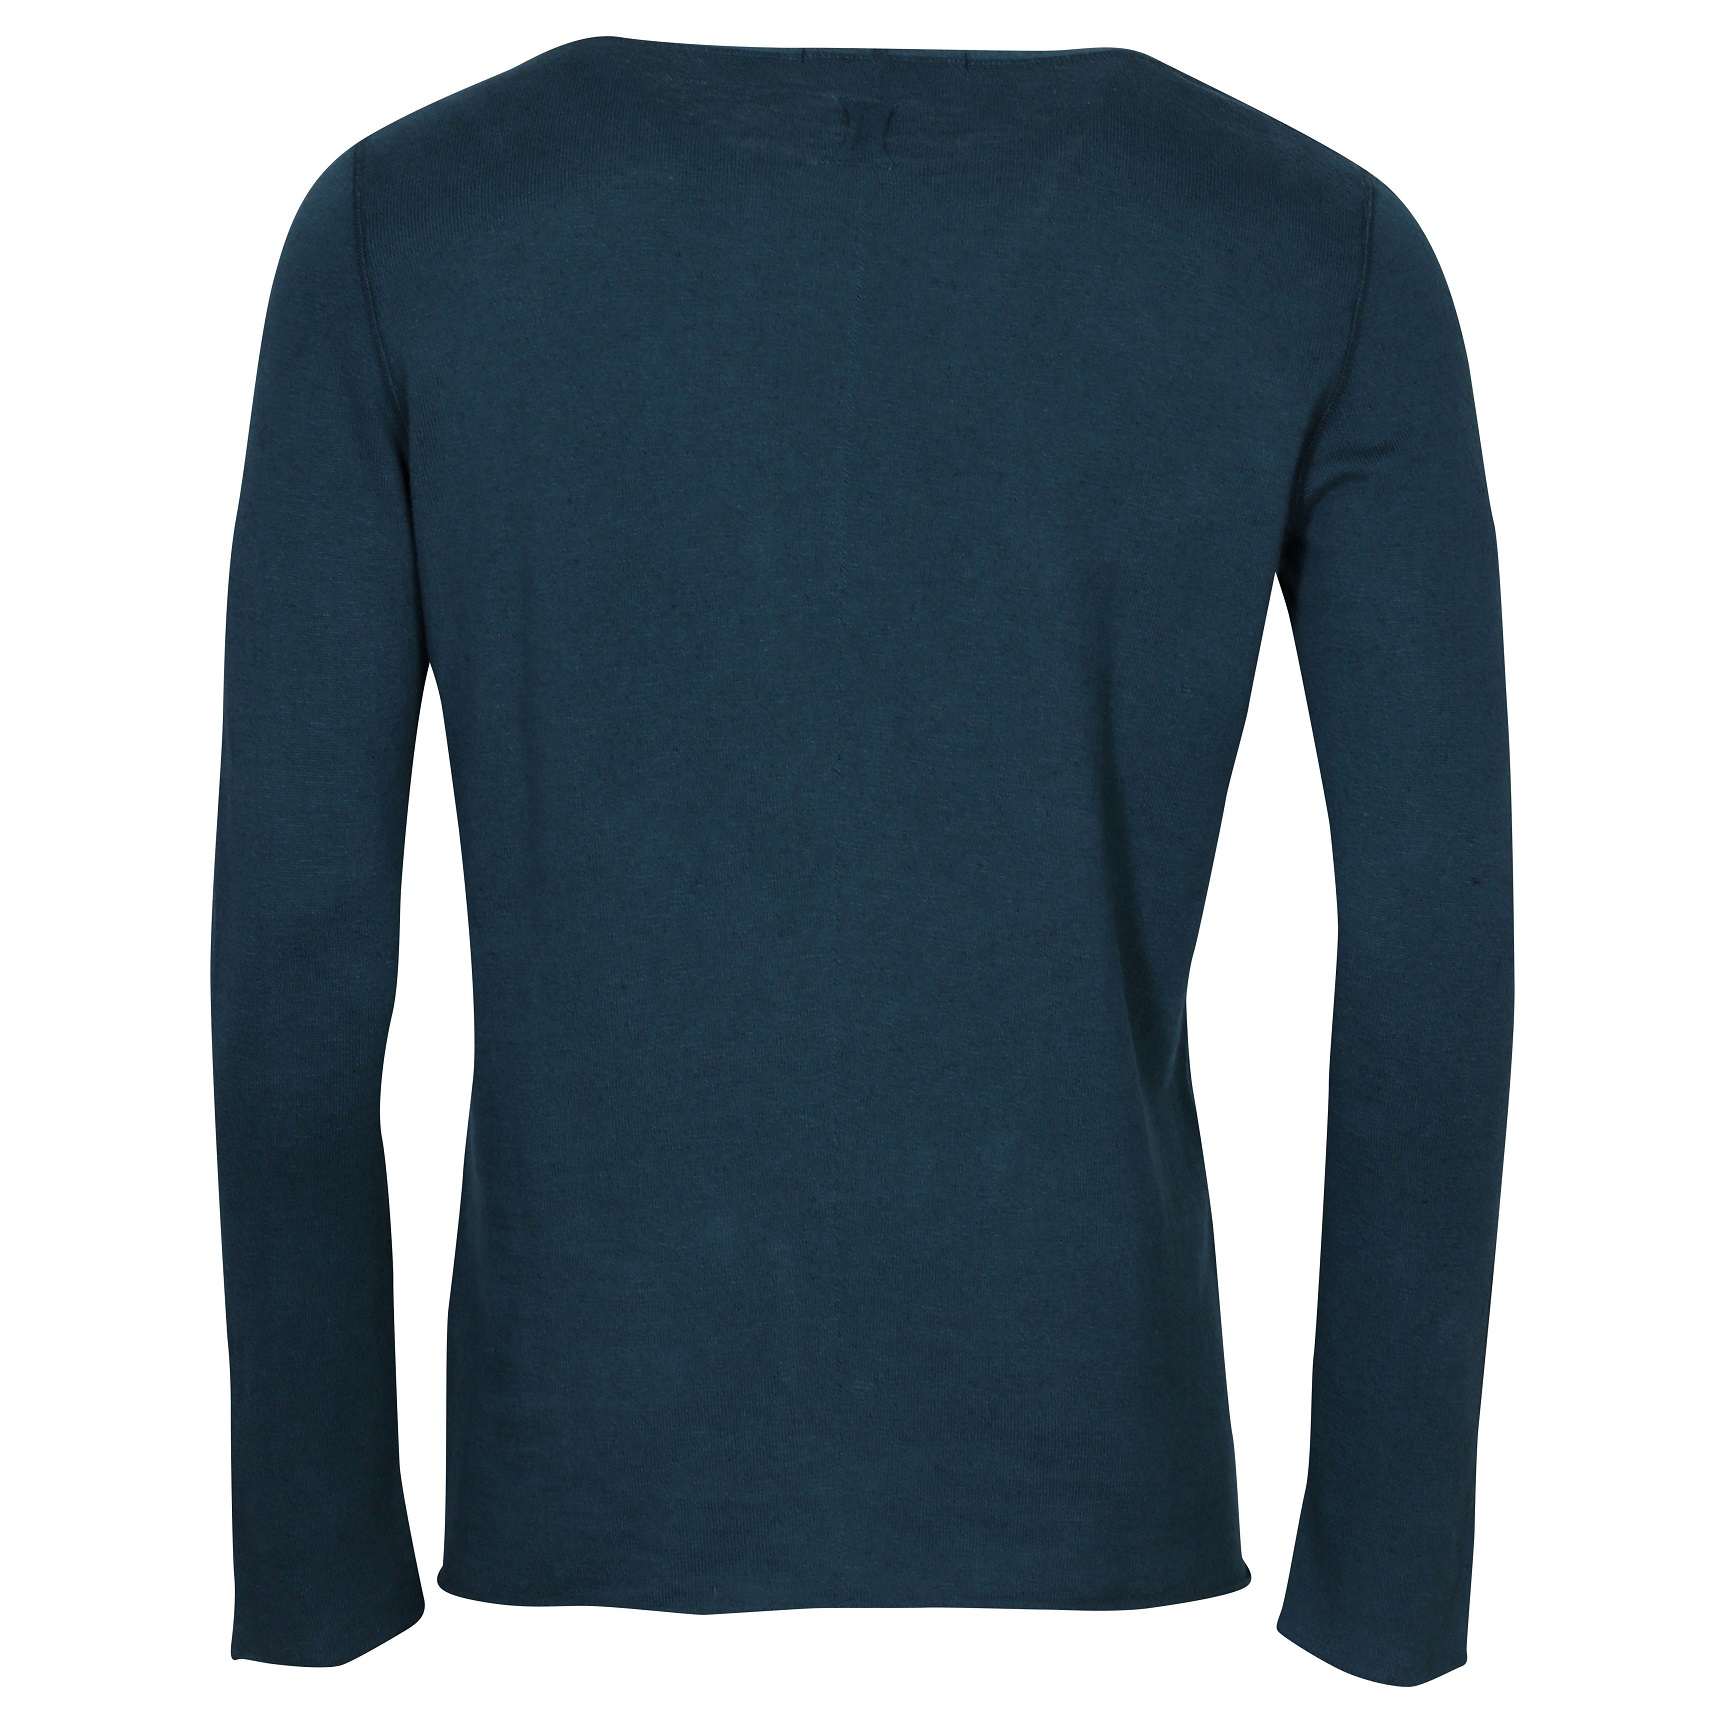 HANNES ROETHER Knit Sweater in Petrol